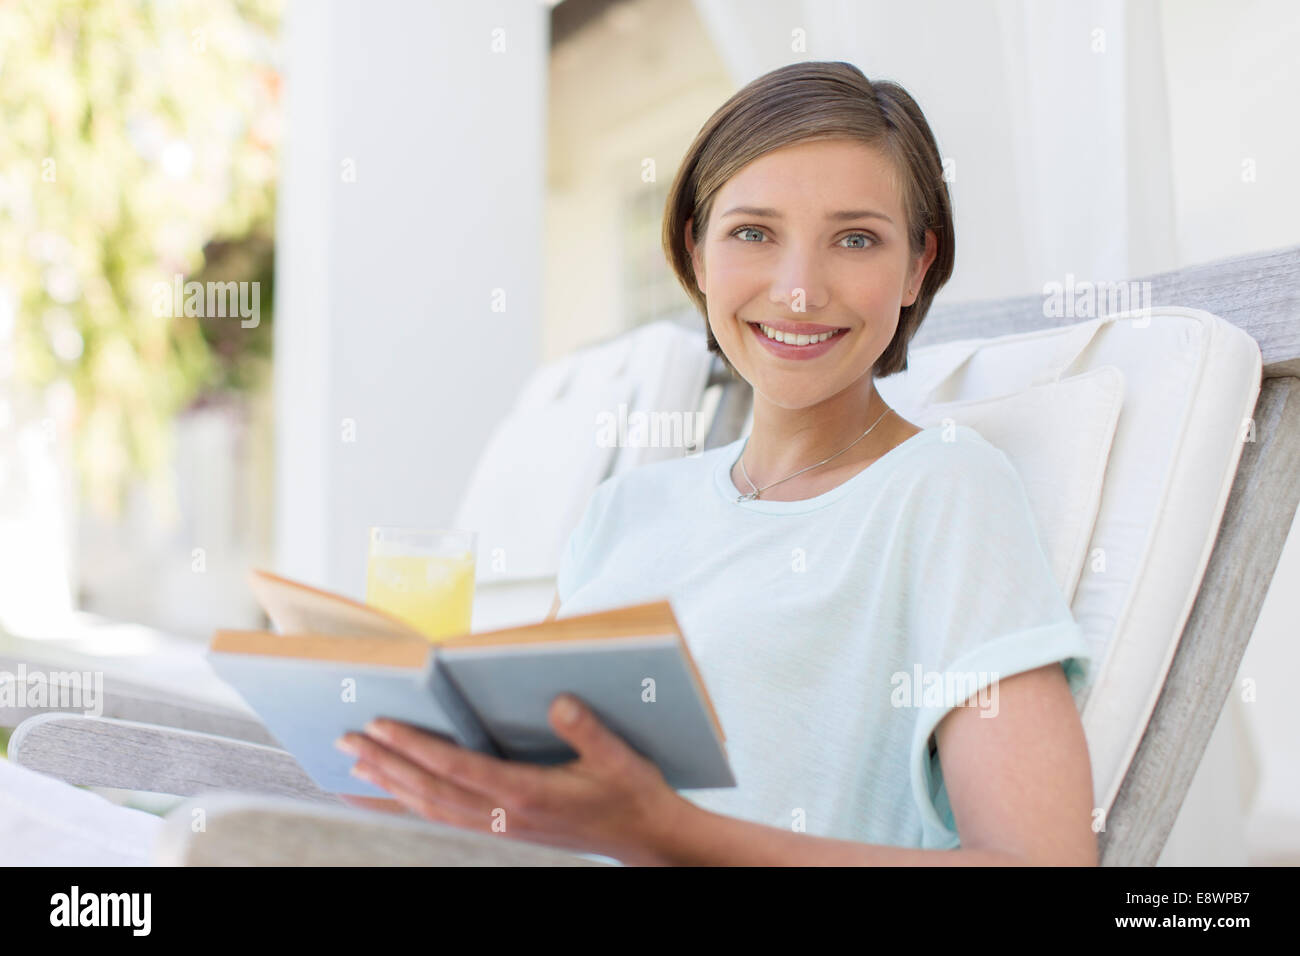 Smiling woman reading book in lawn chair Stock Photo